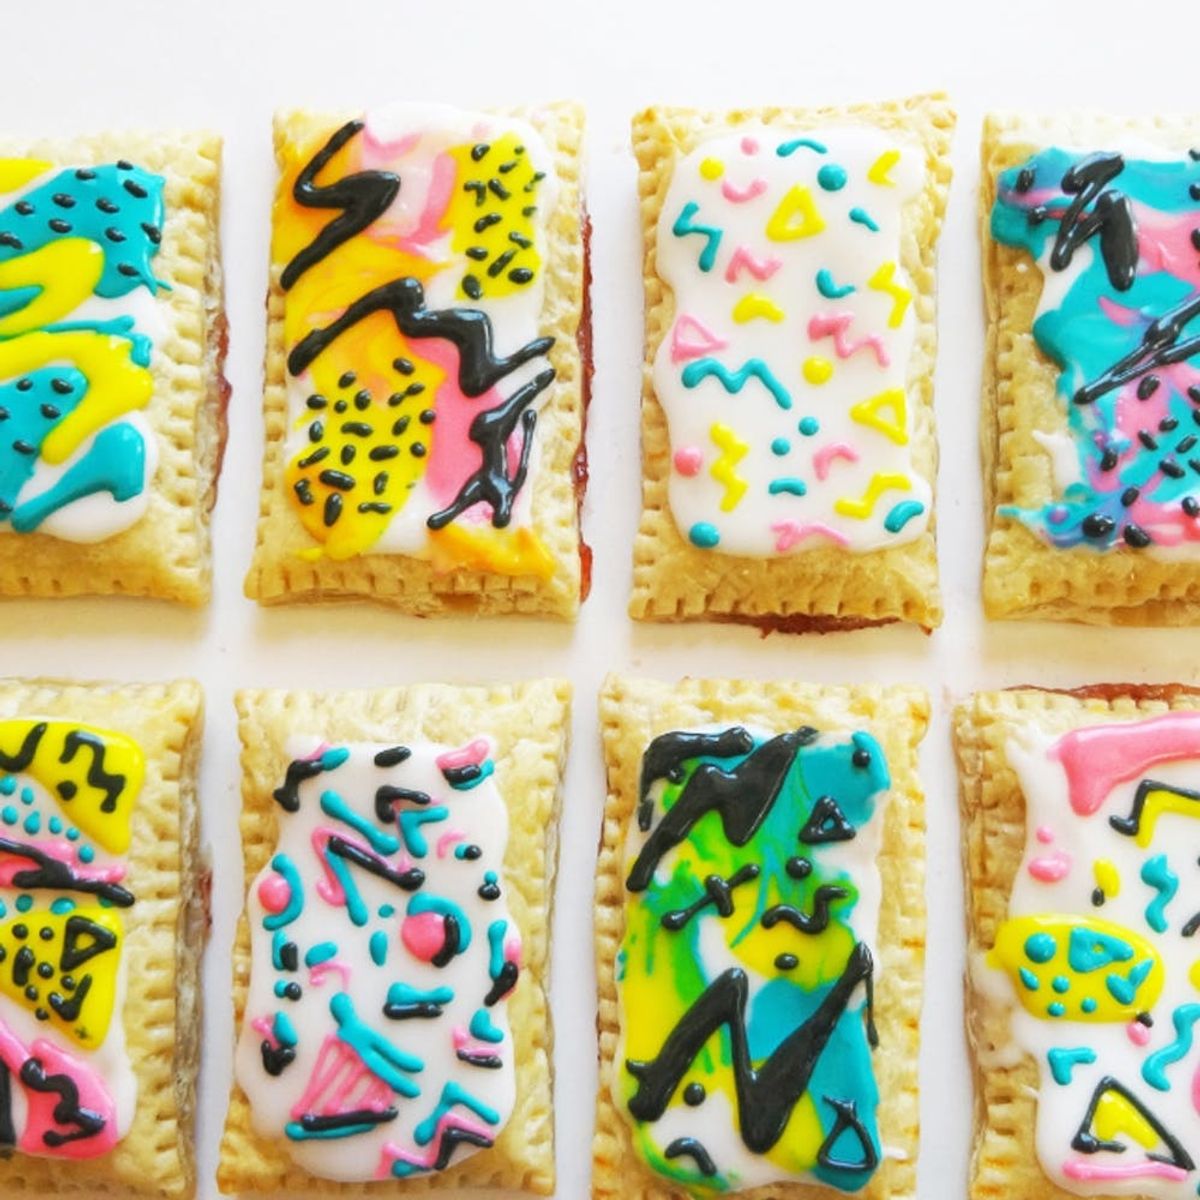 These Retro Pop Tarts Will Take You Back to the ’90s